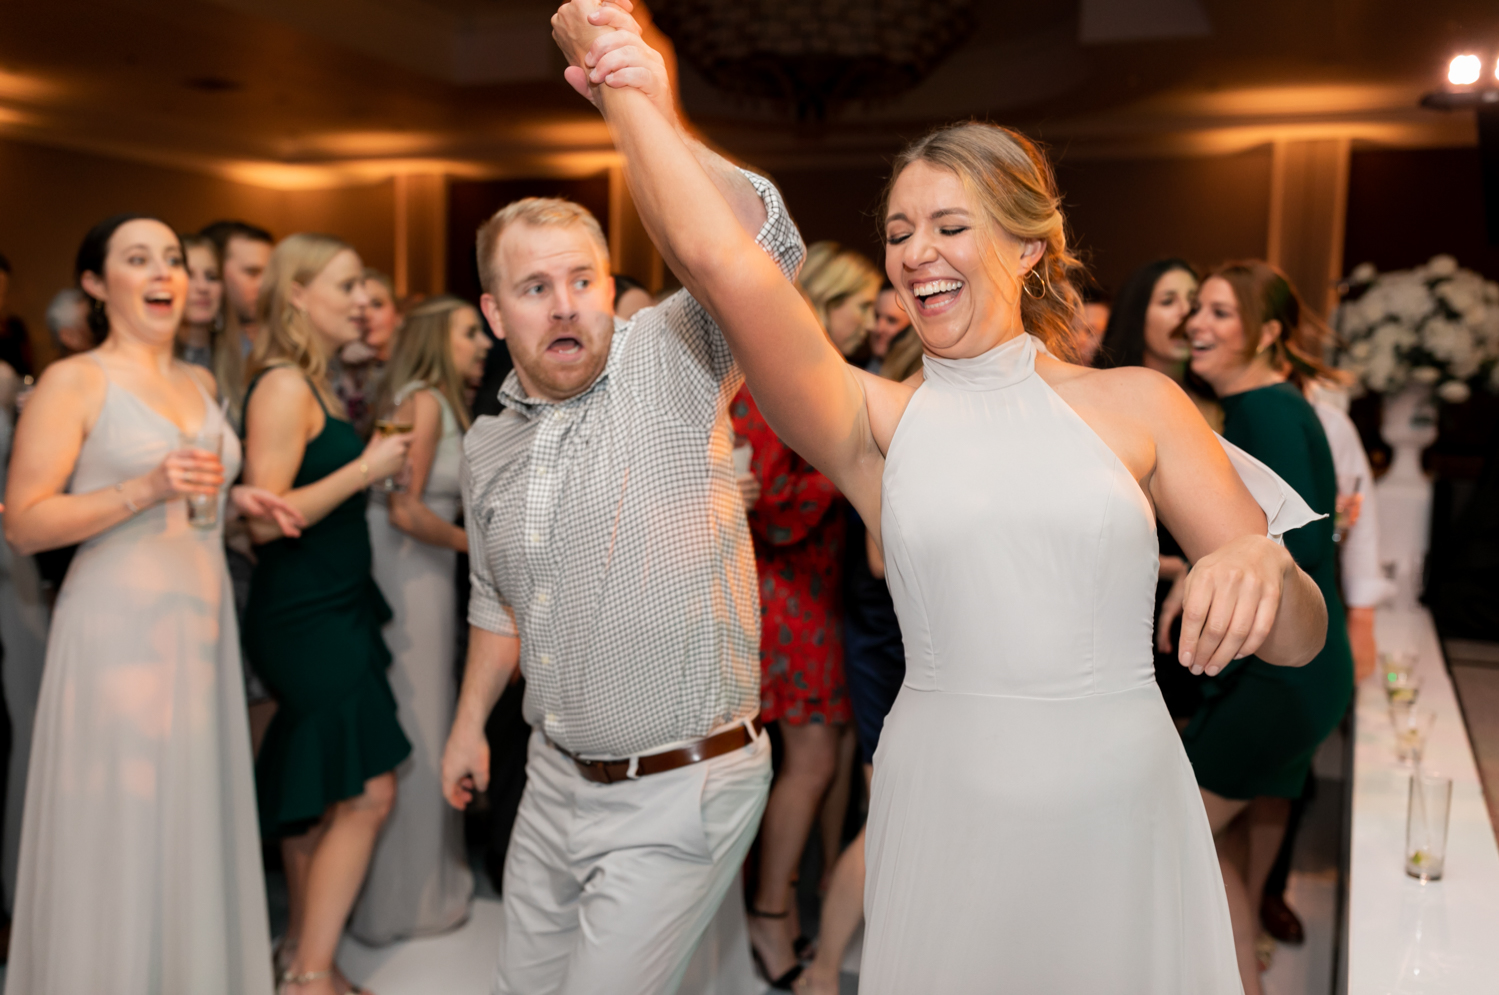 A guest spins one of the bridesmaids on the dance floor and they both laugh.